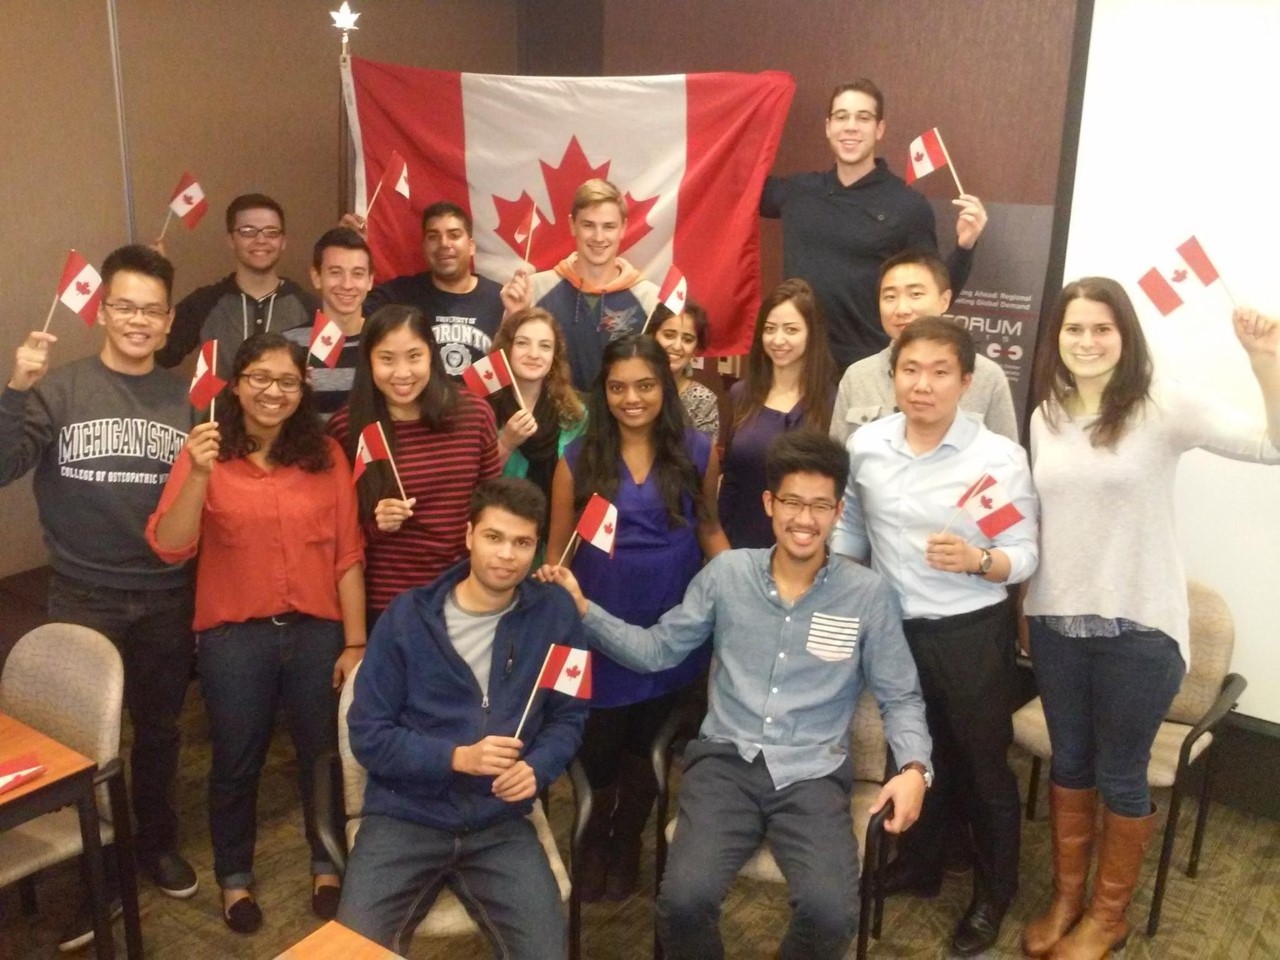 A diverse group of smiling students, standing in front of the Canadian flag. Some are holding small Canadian flags.